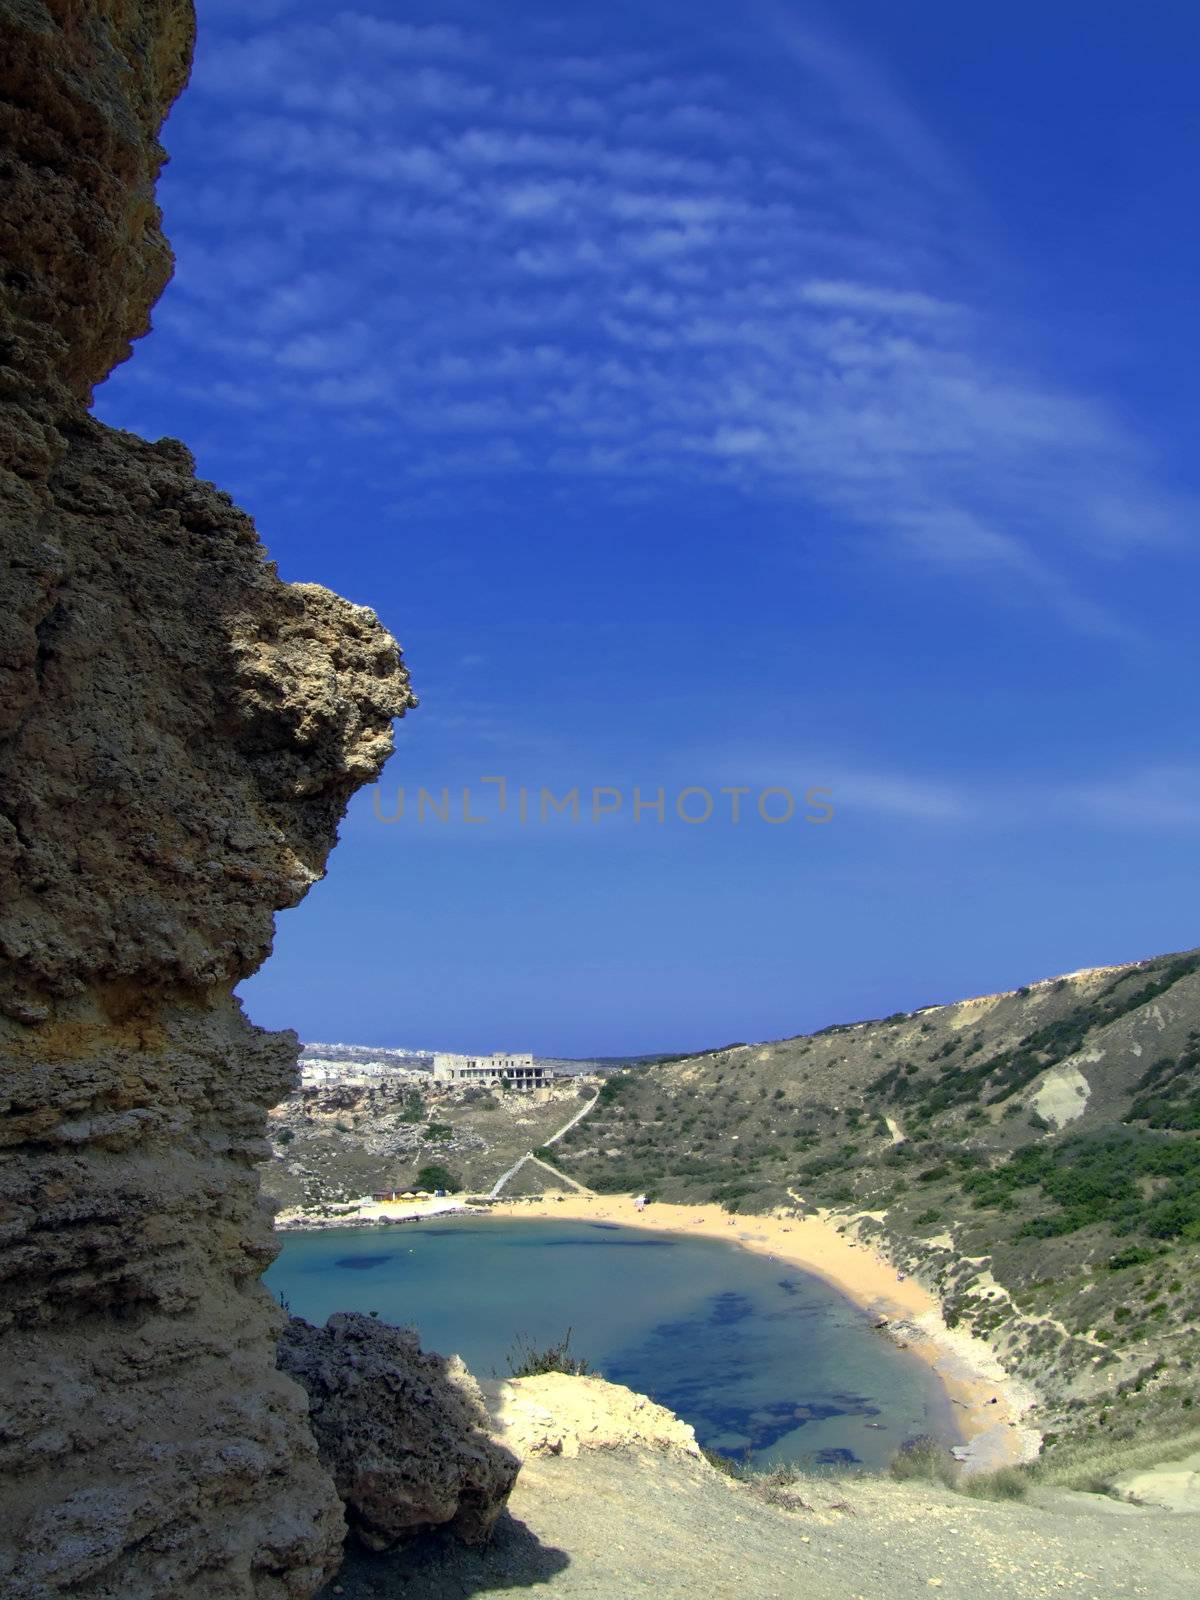 One of the most beautiful beaches in the Mediterranean island of Malta